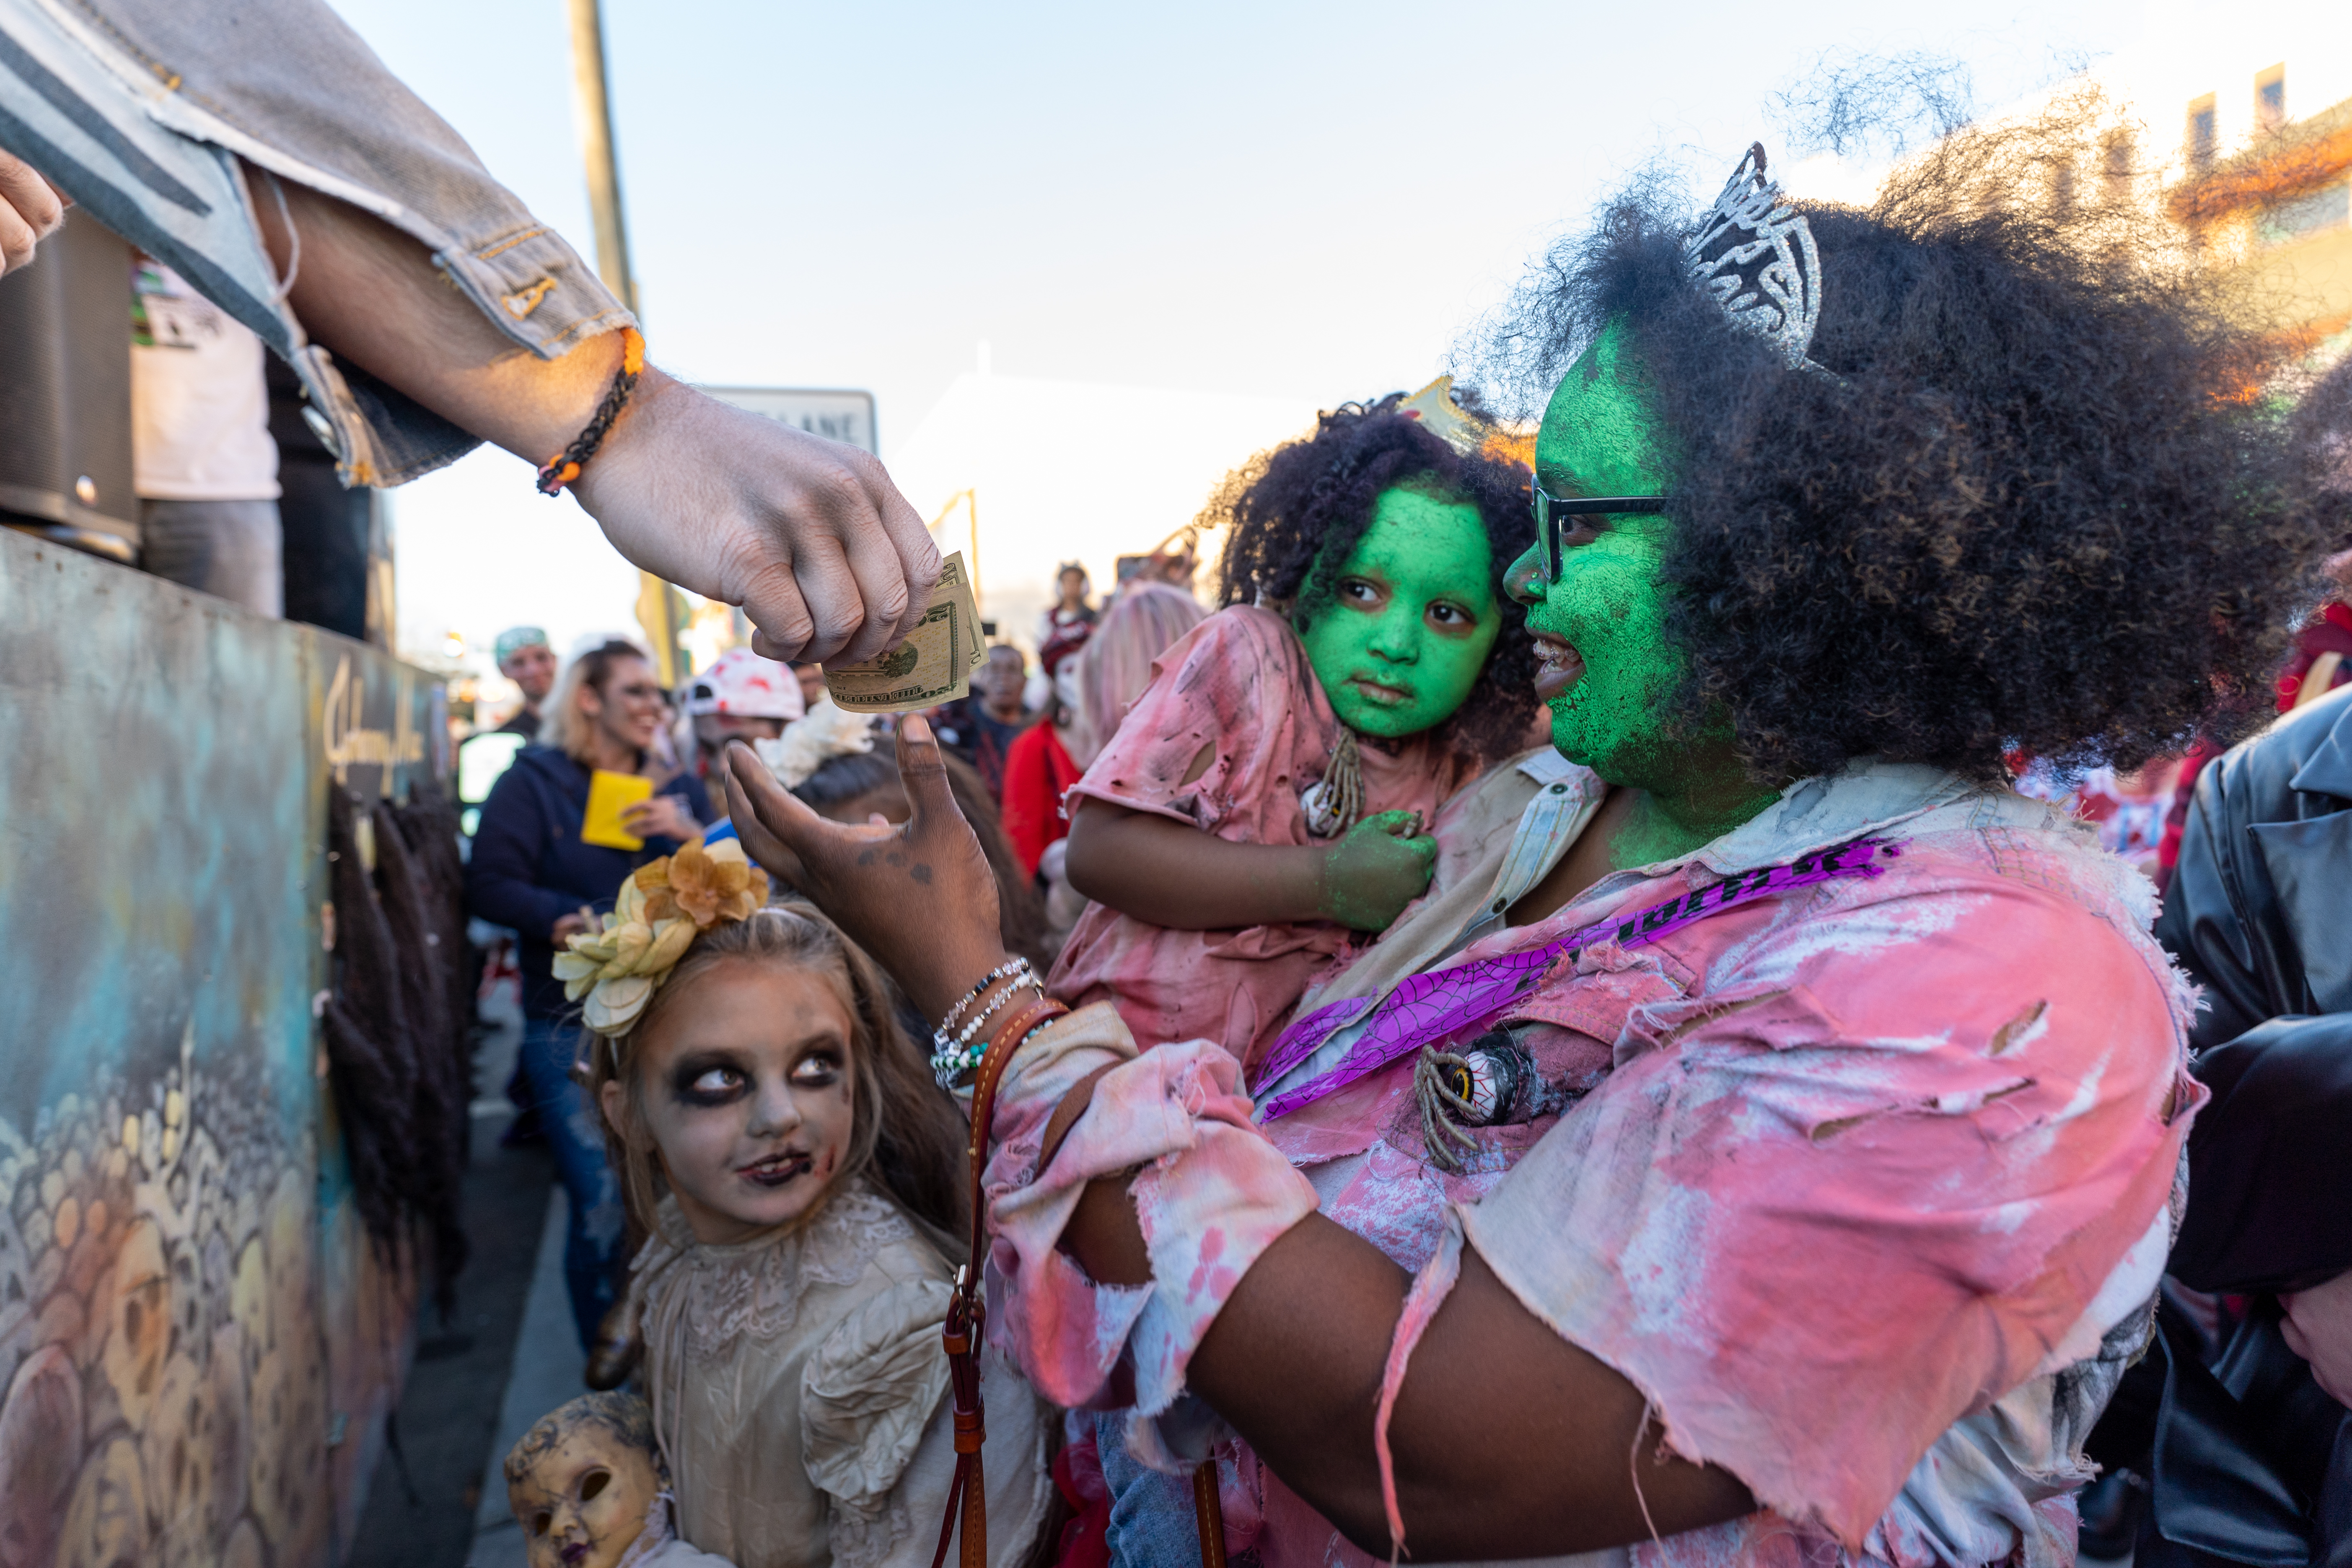 A zombie receives $20 as a runner-up prize in the zombie costume contest youth category during the 14th Asbury Park Zombie Walk in Asbury Park on Saturday, October 8, 2022. The zombie walk held its first themed year with the theme being 80's and 90's punk and metal.